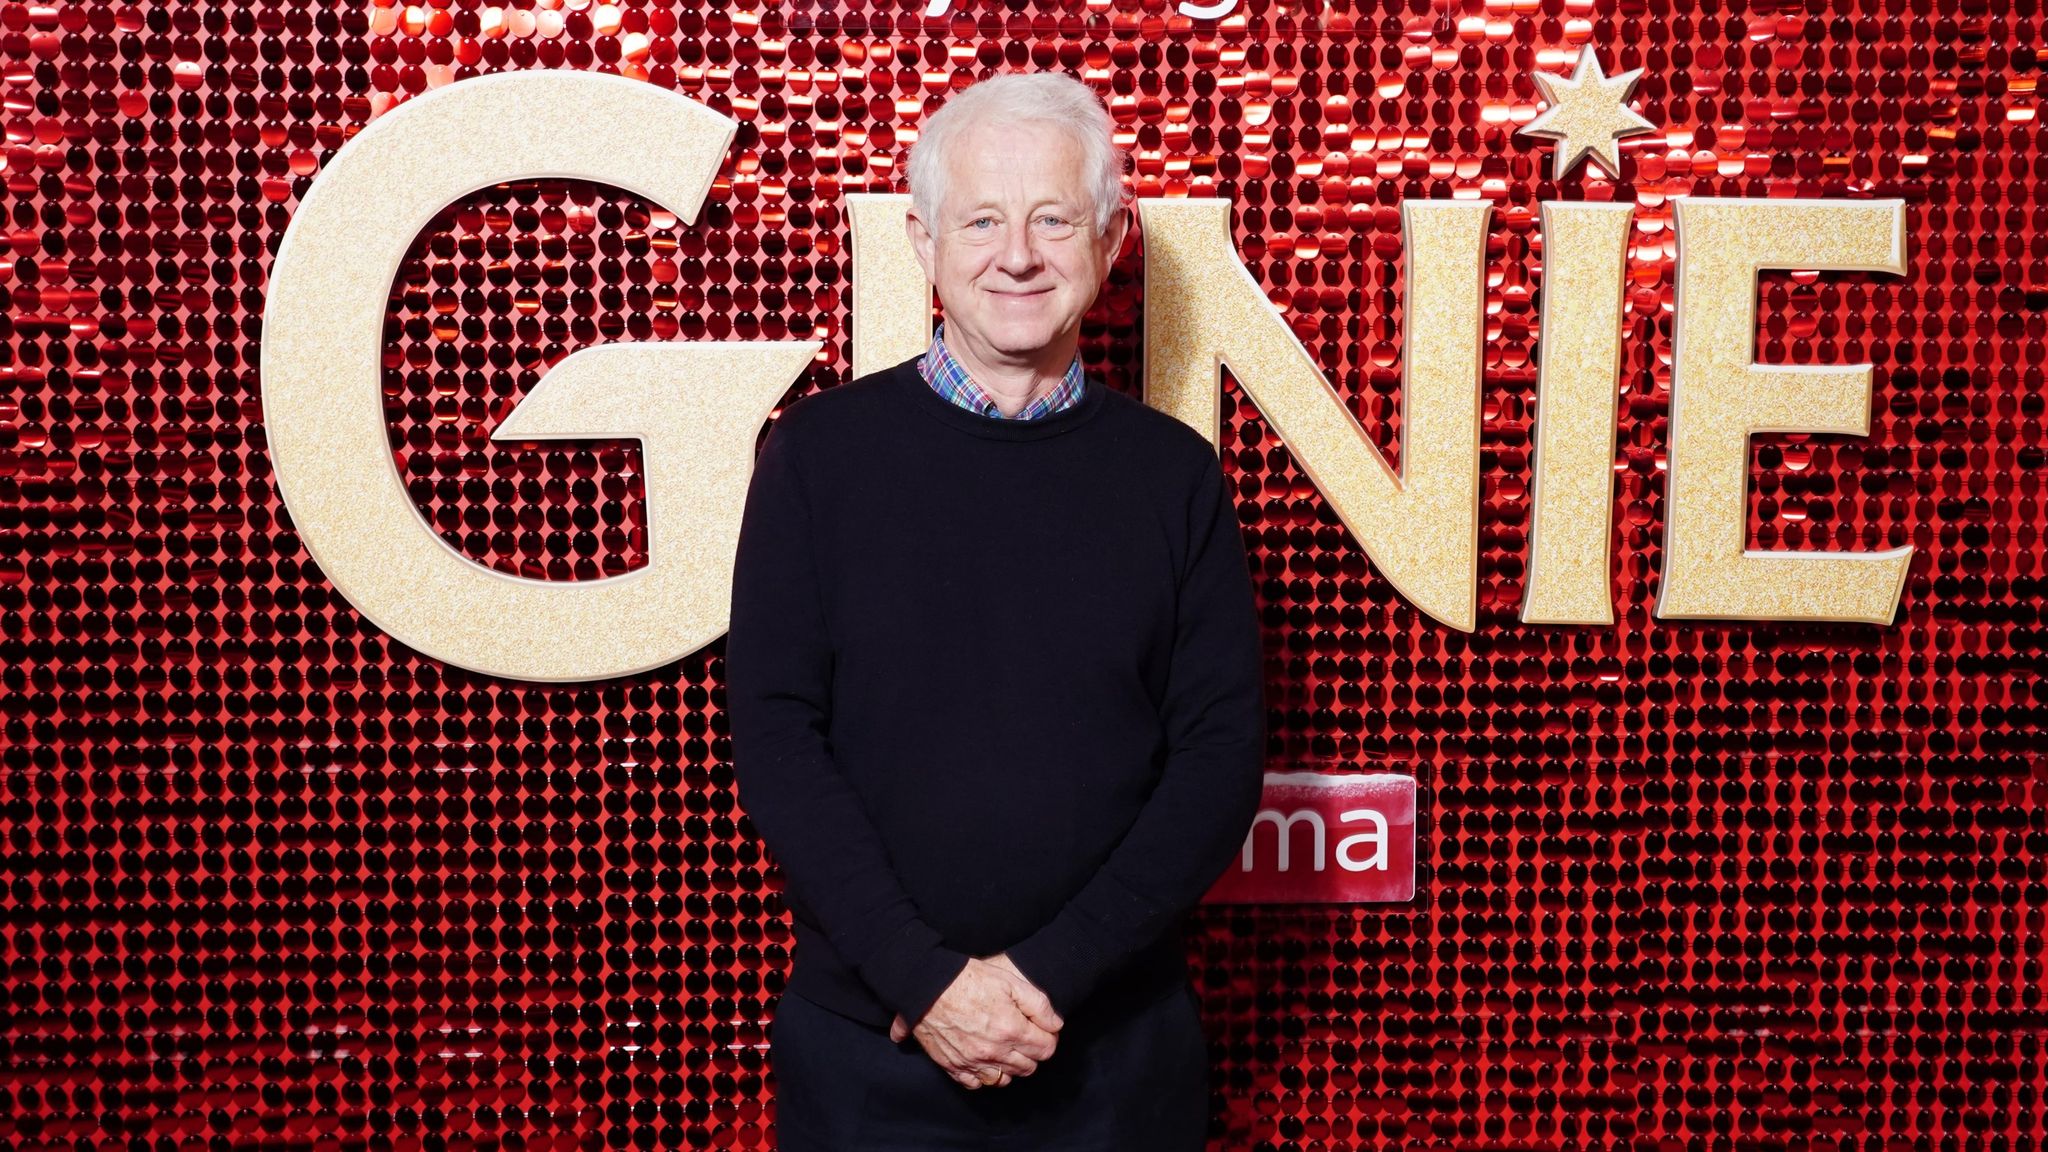 Genie Interview: Writer Richard Curtis On Updating His '90s Movie To A  Family-Centric Story